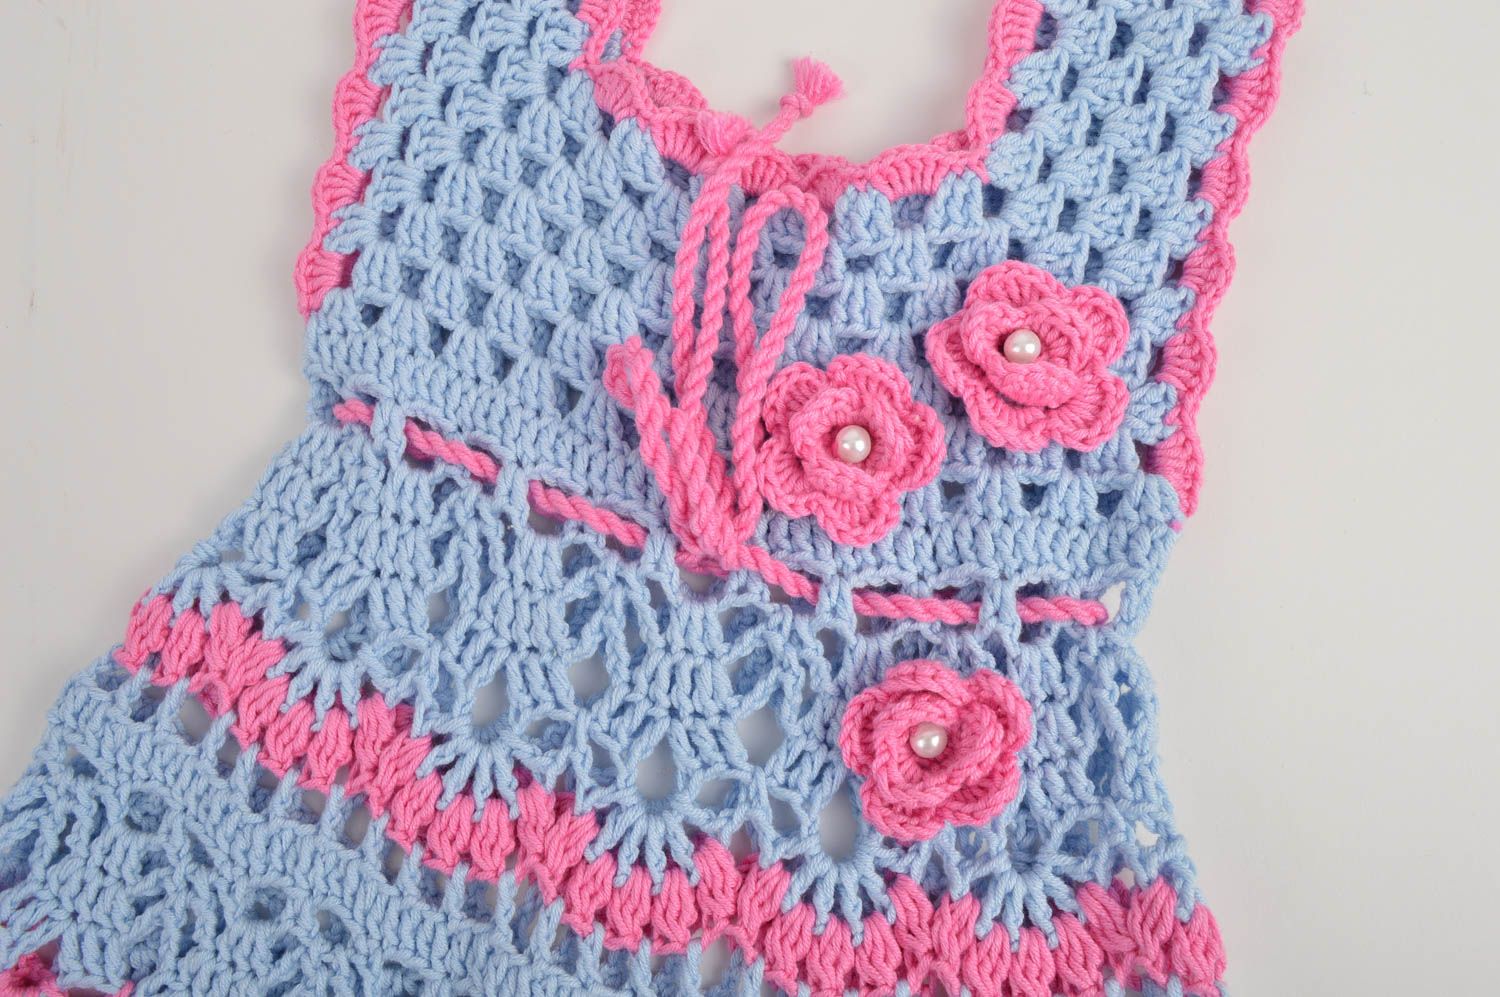 Unusual handmade crochet dress cute baby outfits designer clothes for kids photo 4